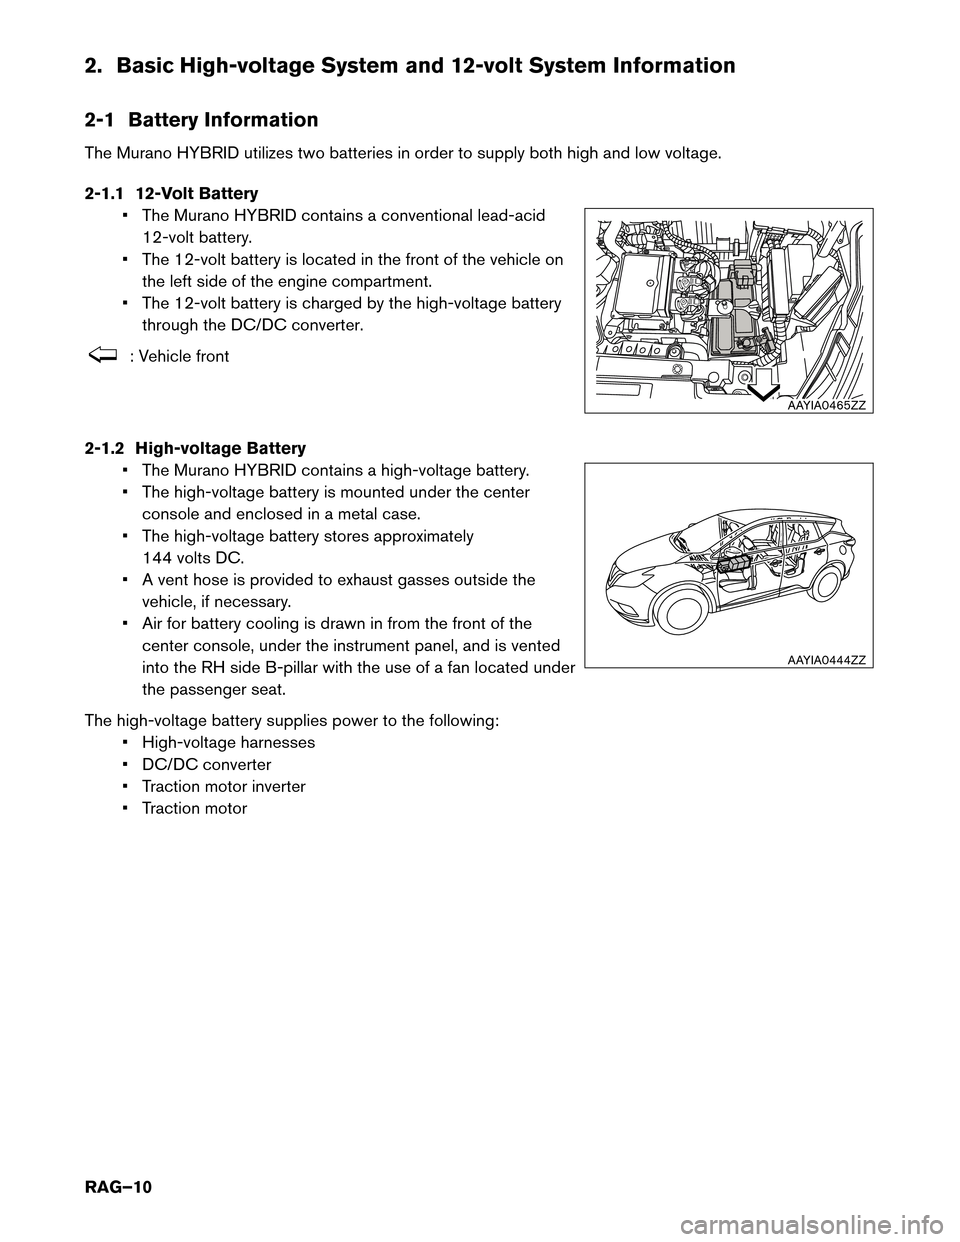 NISSAN MURANO HYBRID 2016 3.G Roadside Assistance Guide 2. Basic High-voltage System and 12-volt System Information
2-1
Battery Information
The Murano HYBRID utilizes two batteries in order to supply both high and low voltage.
2-1.1 12-Volt Battery • The